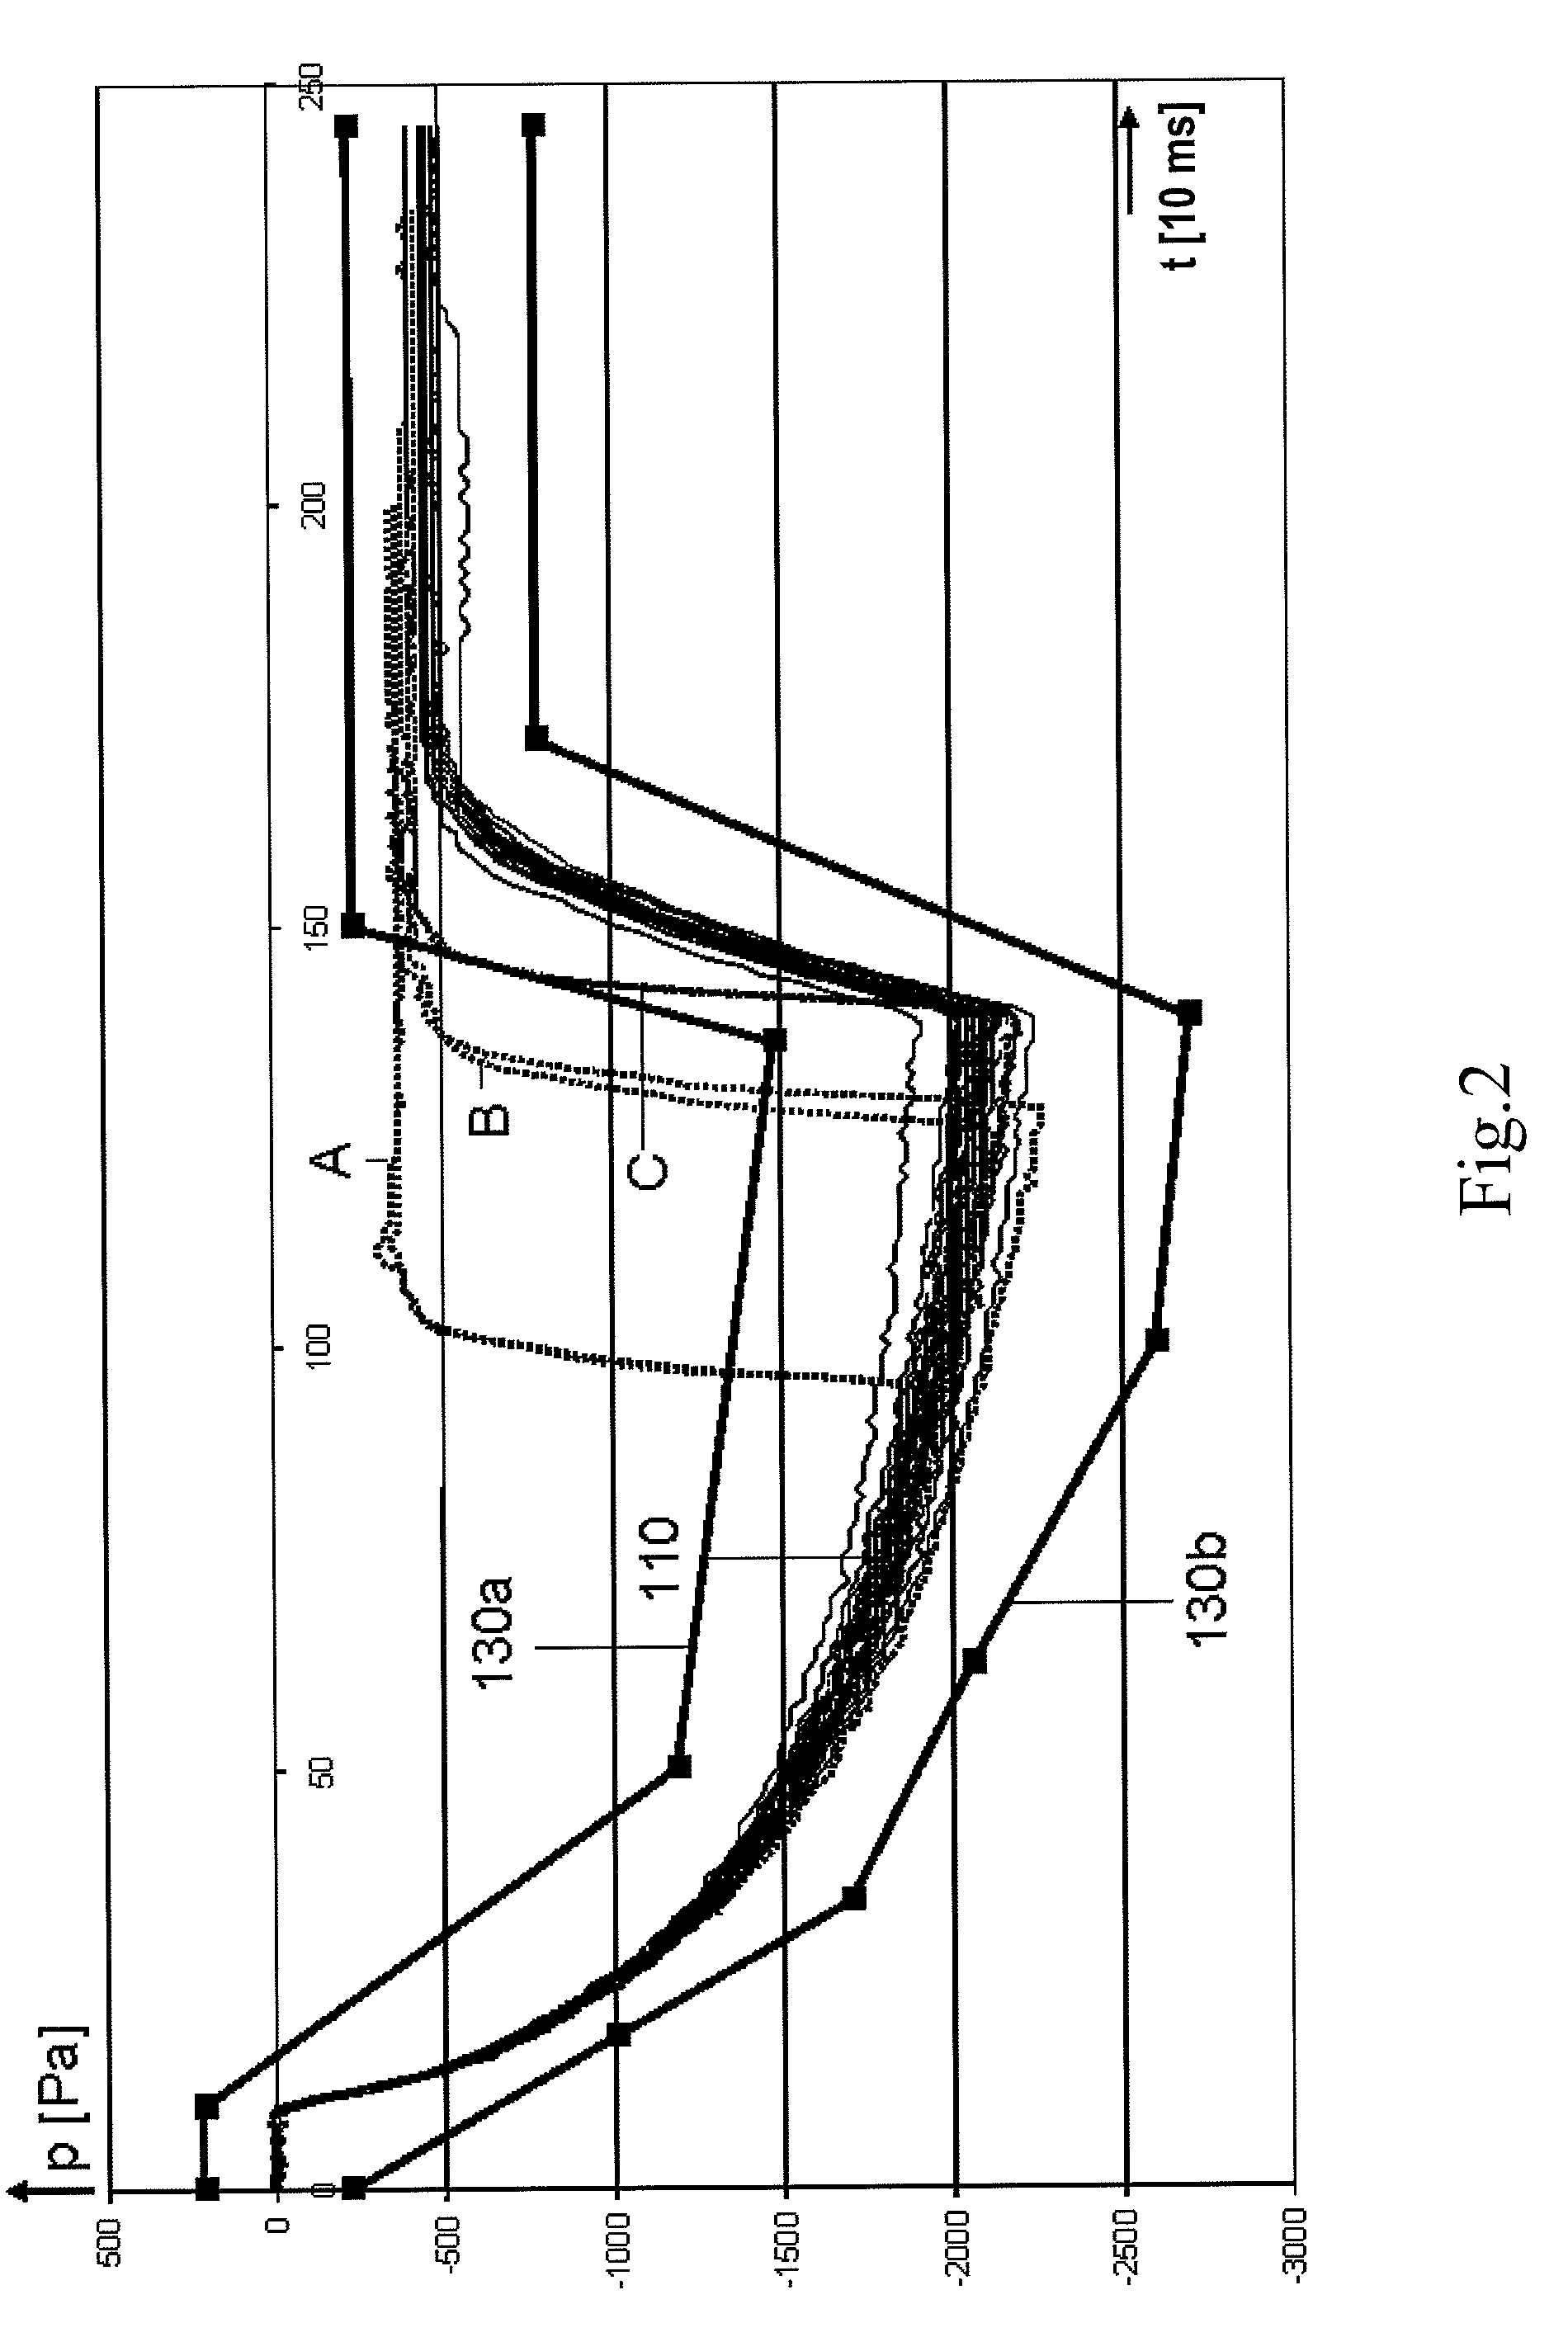 Method for monitoring a fluid transfer process